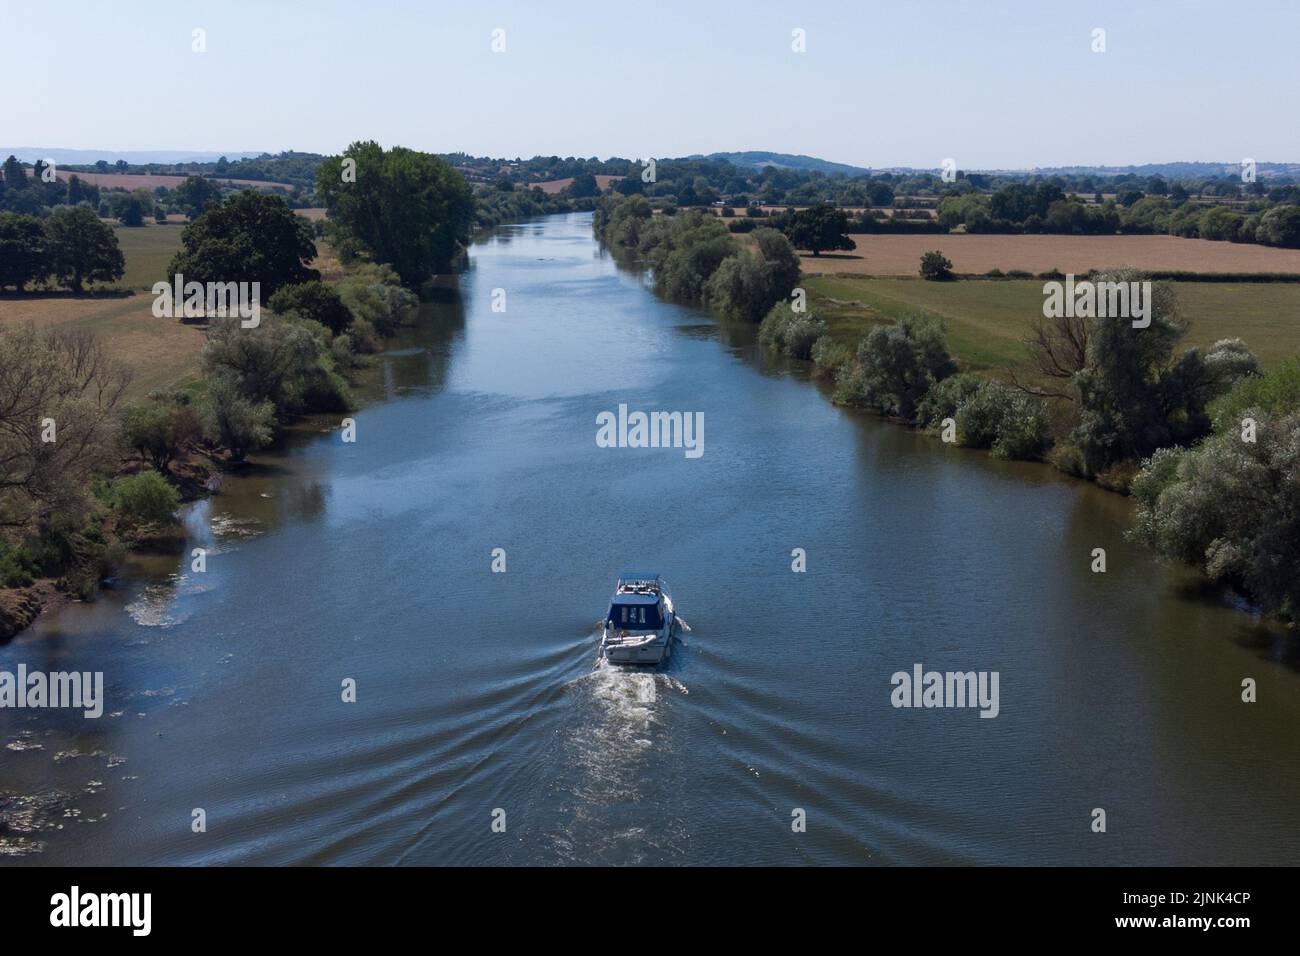 Forthampton, Gloucestershire August 12th 2022 - A boat navigates down the River Severn near Tewkesbury in Gloucestershire, England during the heatwave. Credit: SCOTT CM/Alamy Live News Stock Photo